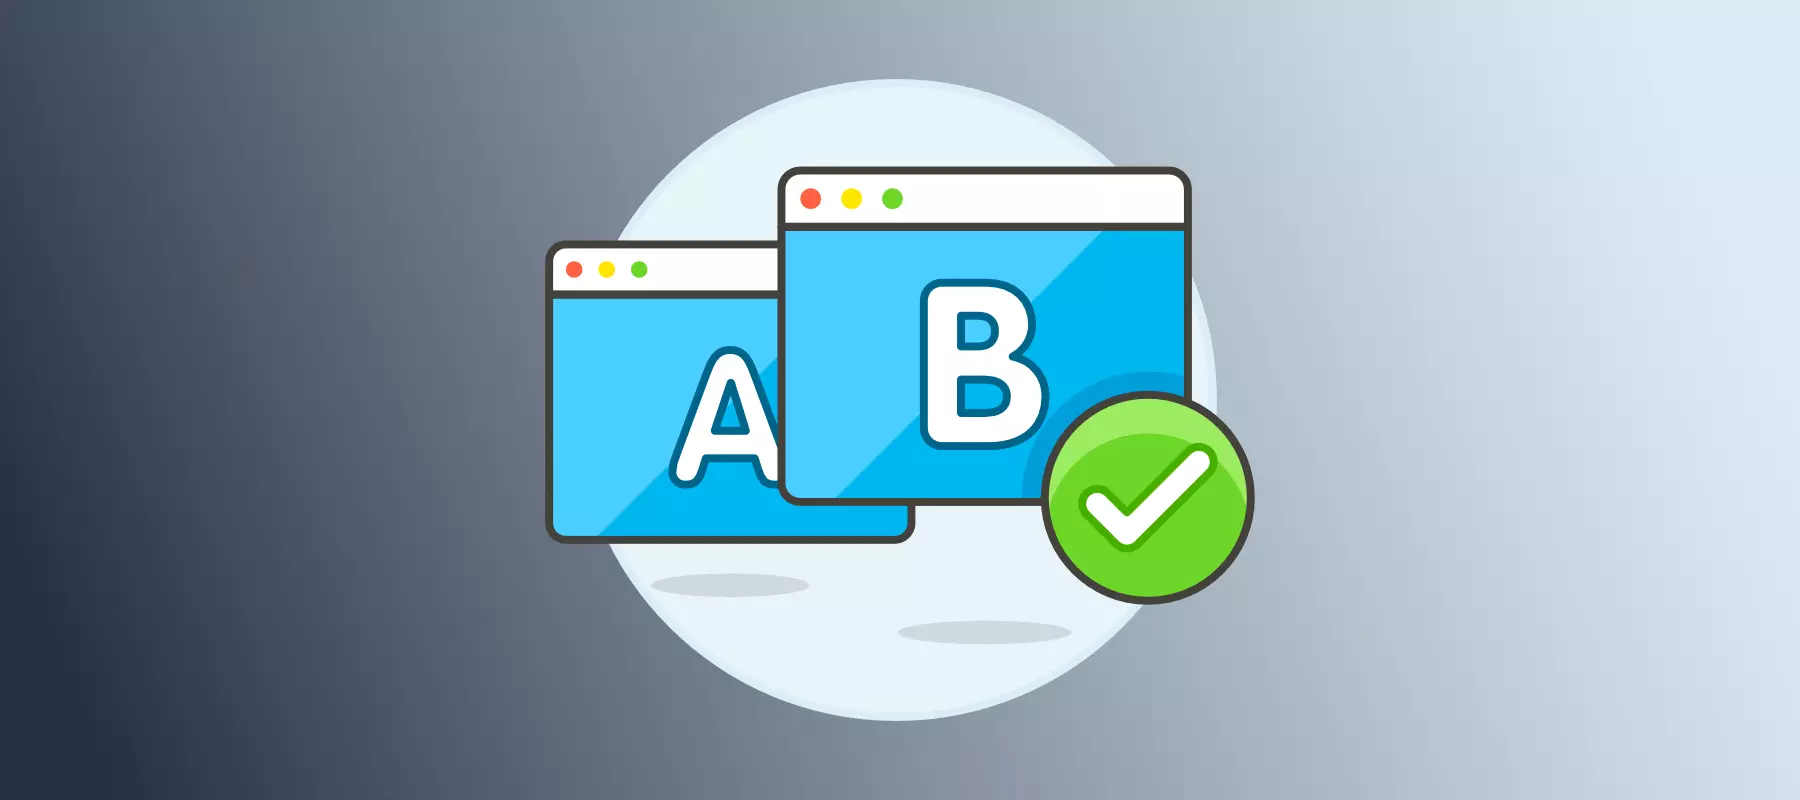 Are the results of your A/B testing accurate?